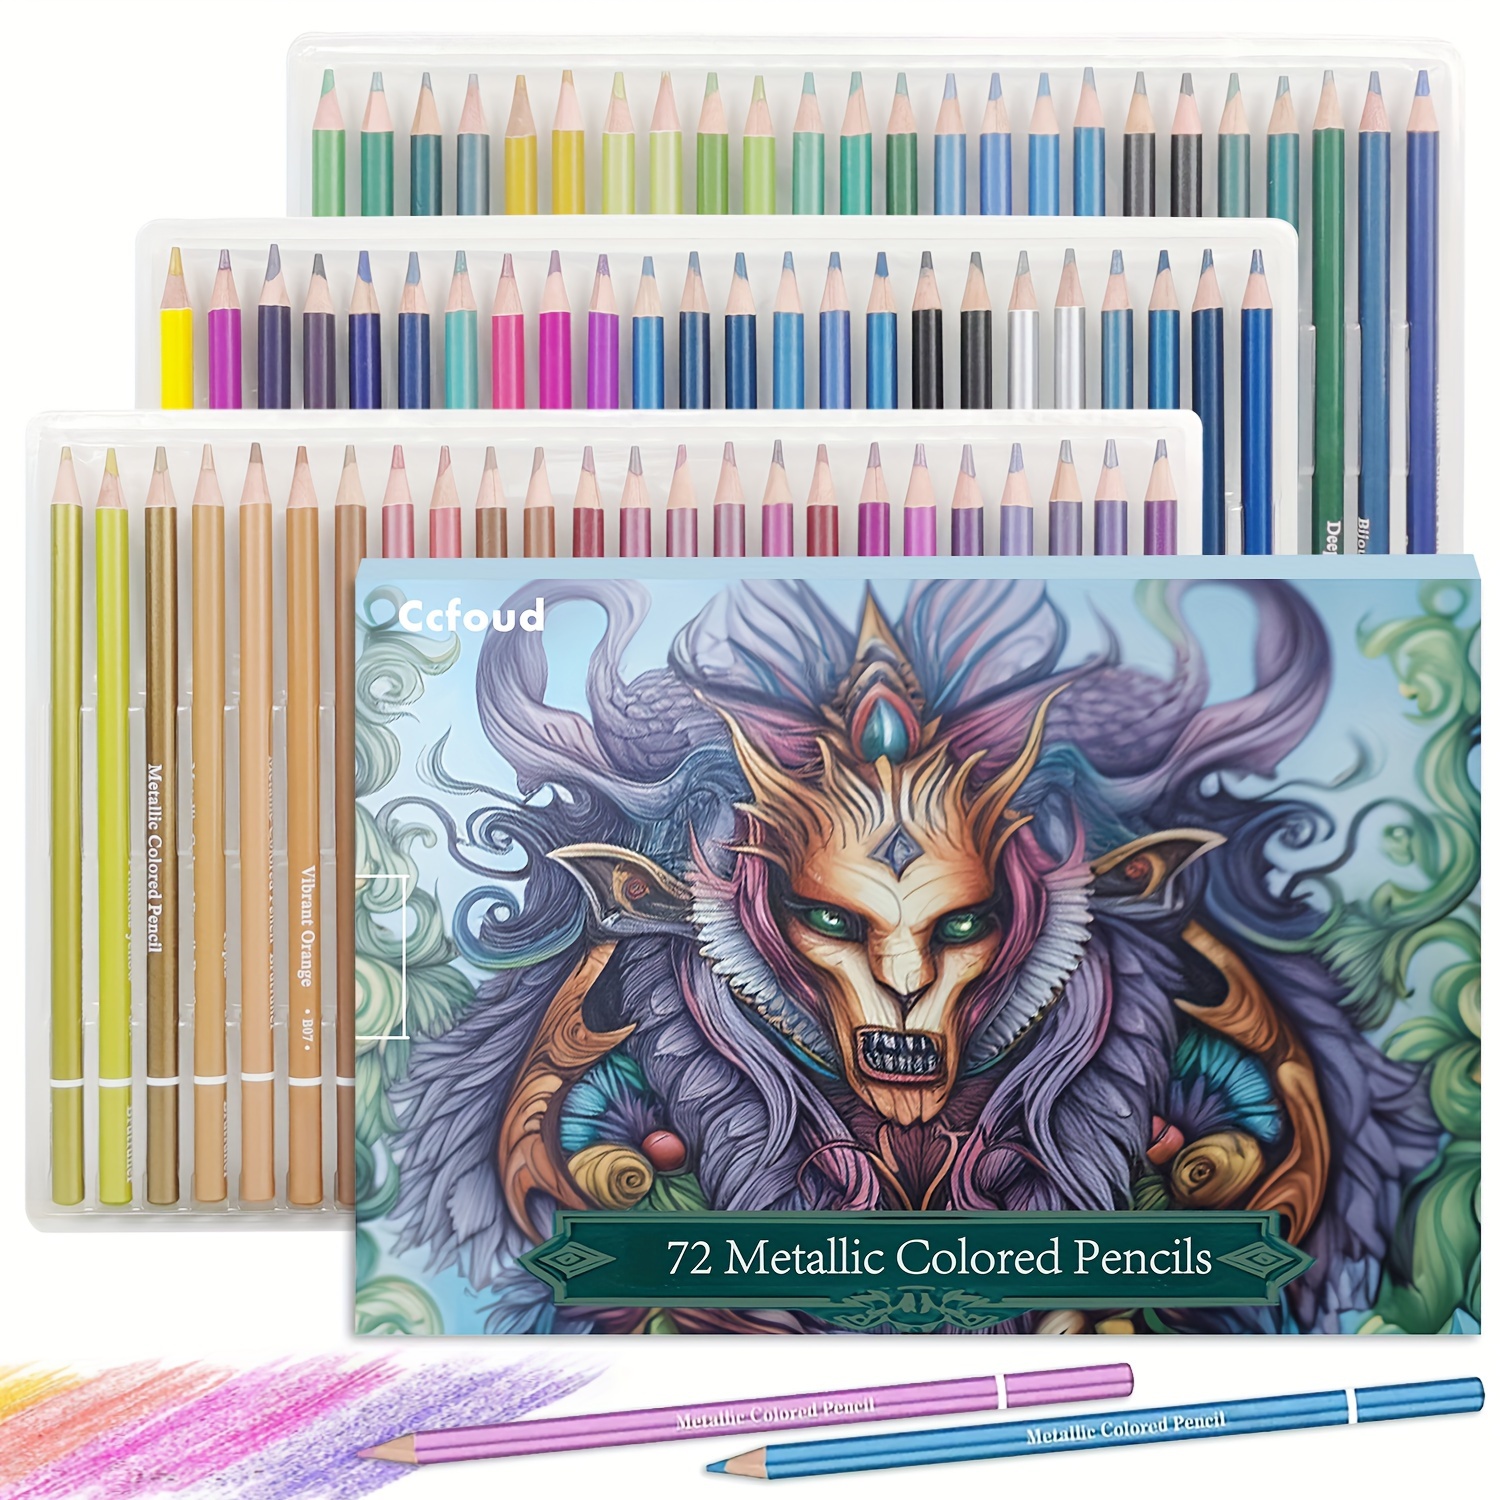 

Ccfoud 72pcs Metallic Colored Pencils, Soft Core With Vibrant Color, Ideal For Drawing, Blending, Sketching, Shading, Coloring For Adults Beginners